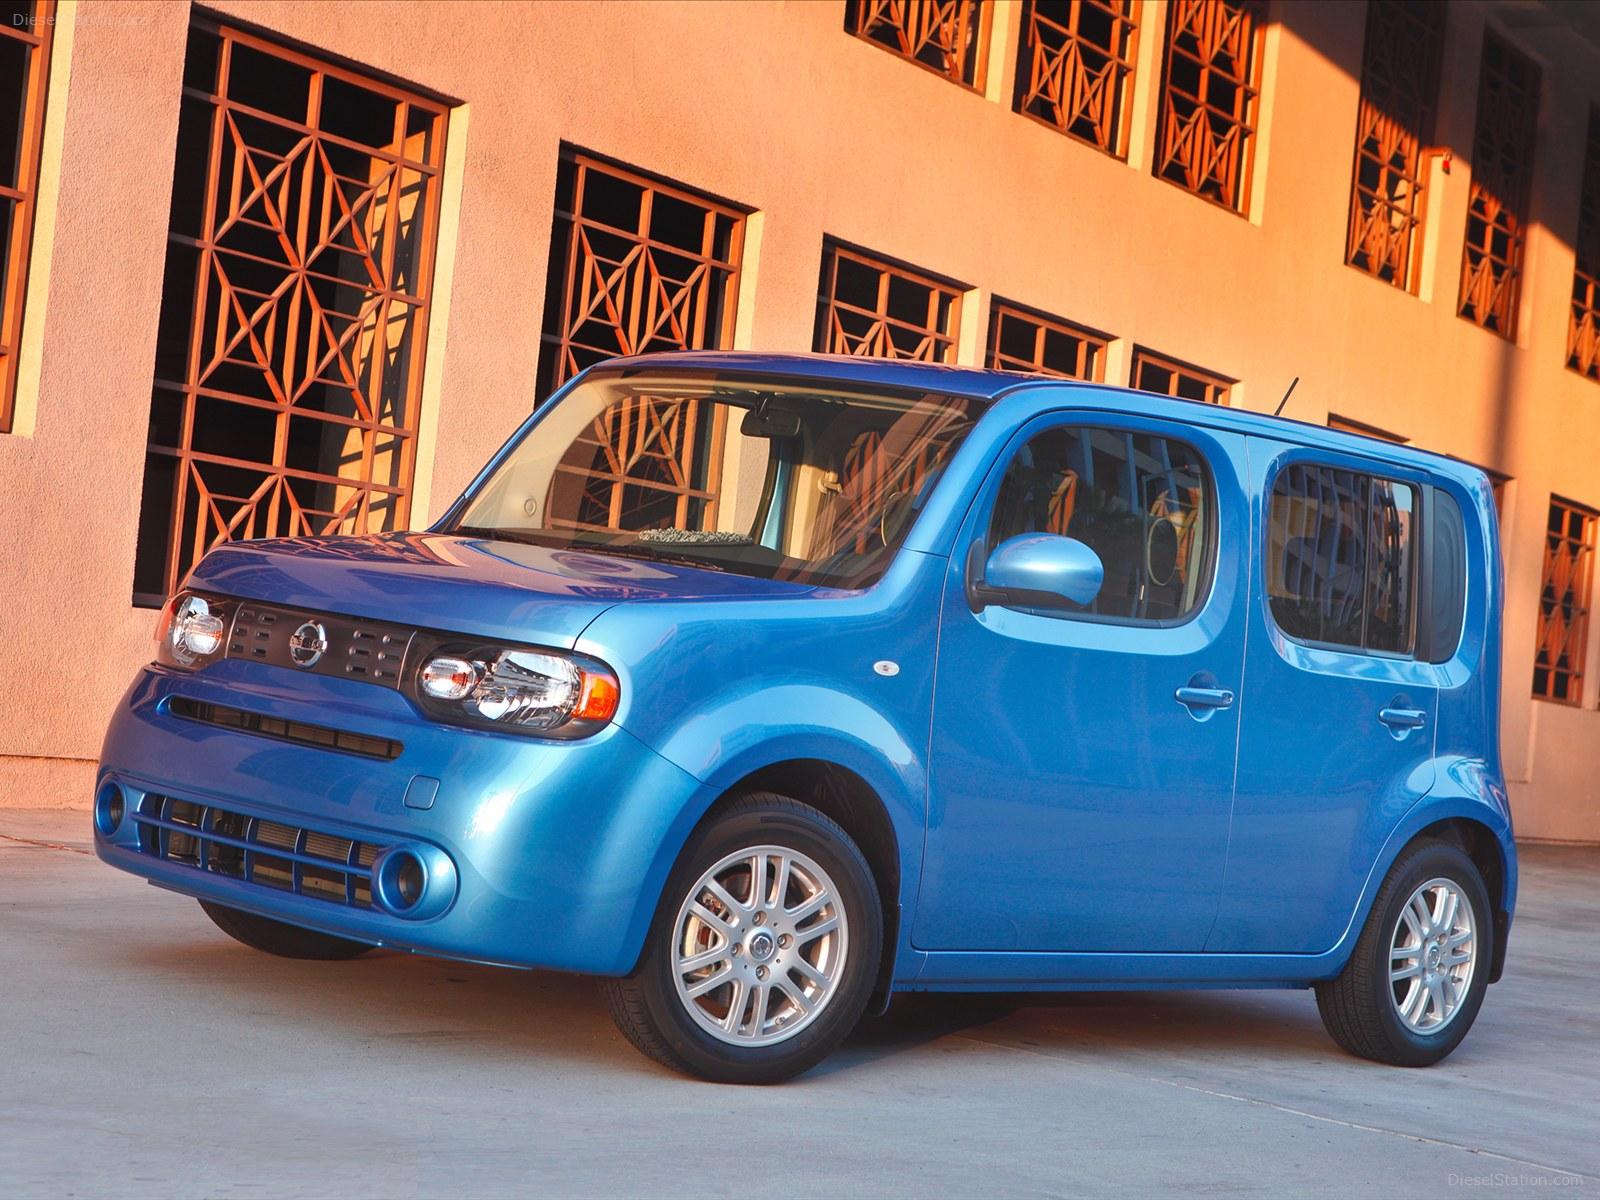 Nissan Cube 2012 Exotic Car Wallpaper of 50, Diesel Station